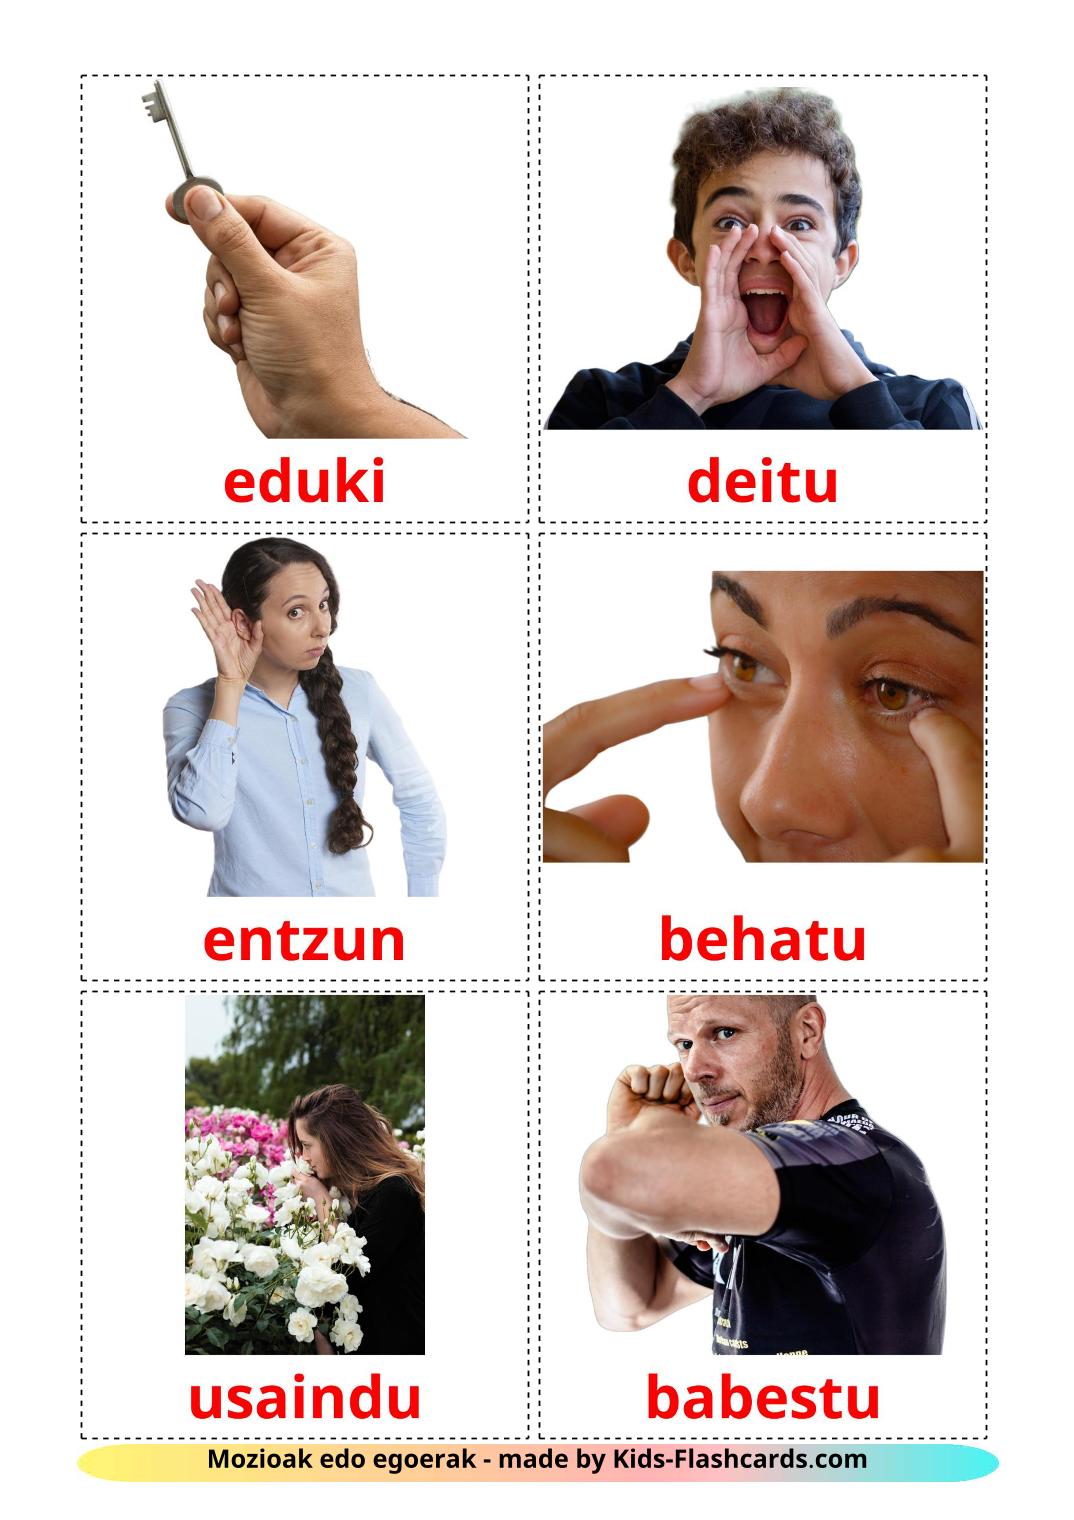 State verbs - 23 Free Printable basque Flashcards 